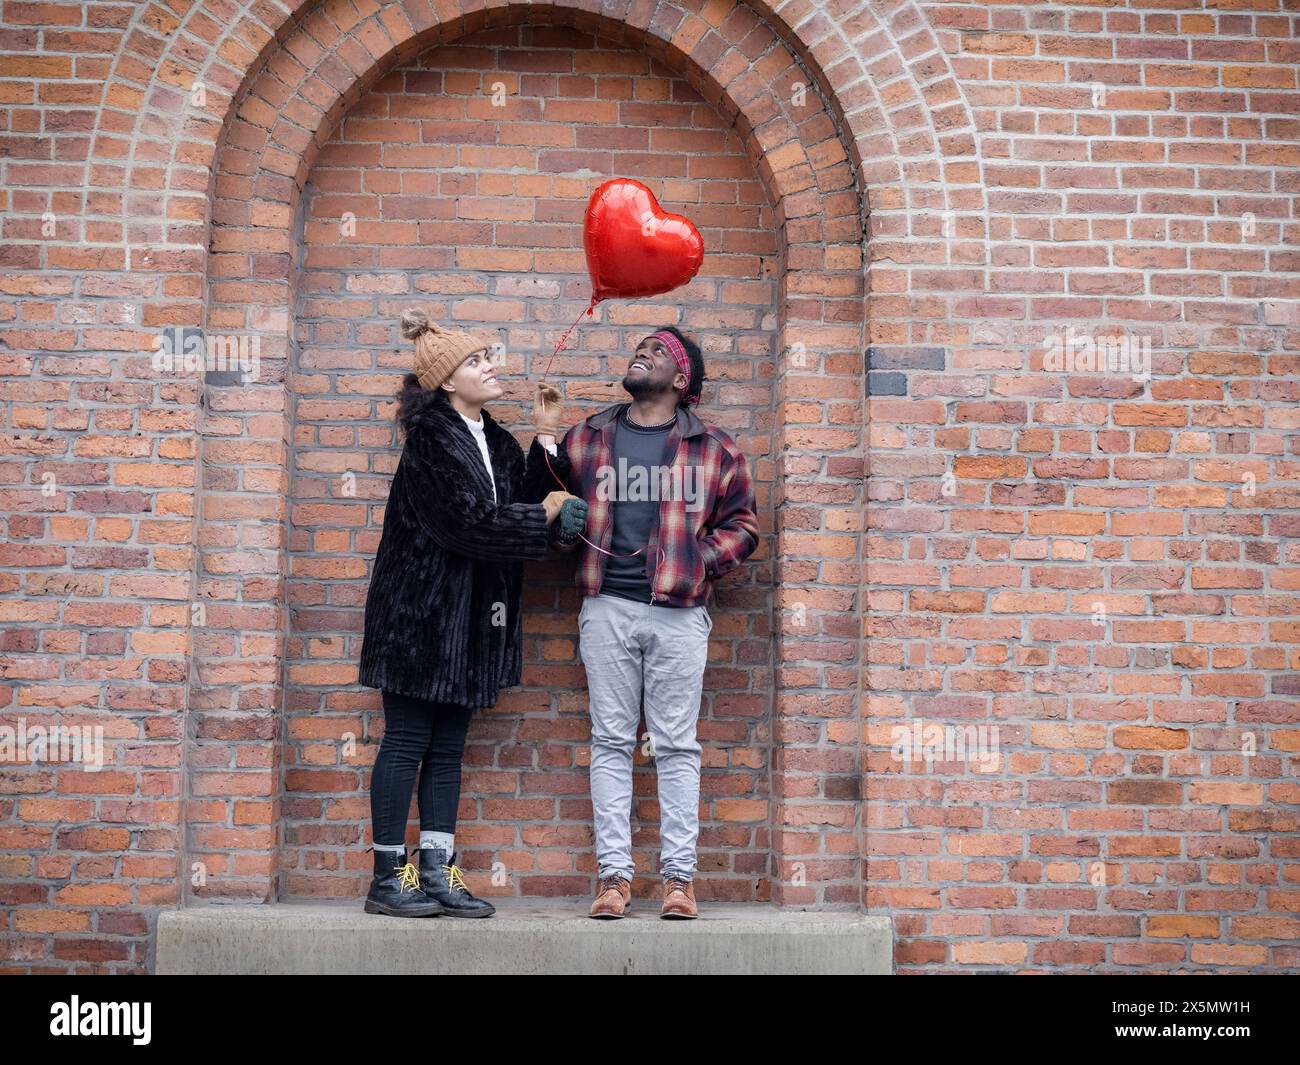 Couple with heart shaped balloon standing in brick wall niche Stock Photo